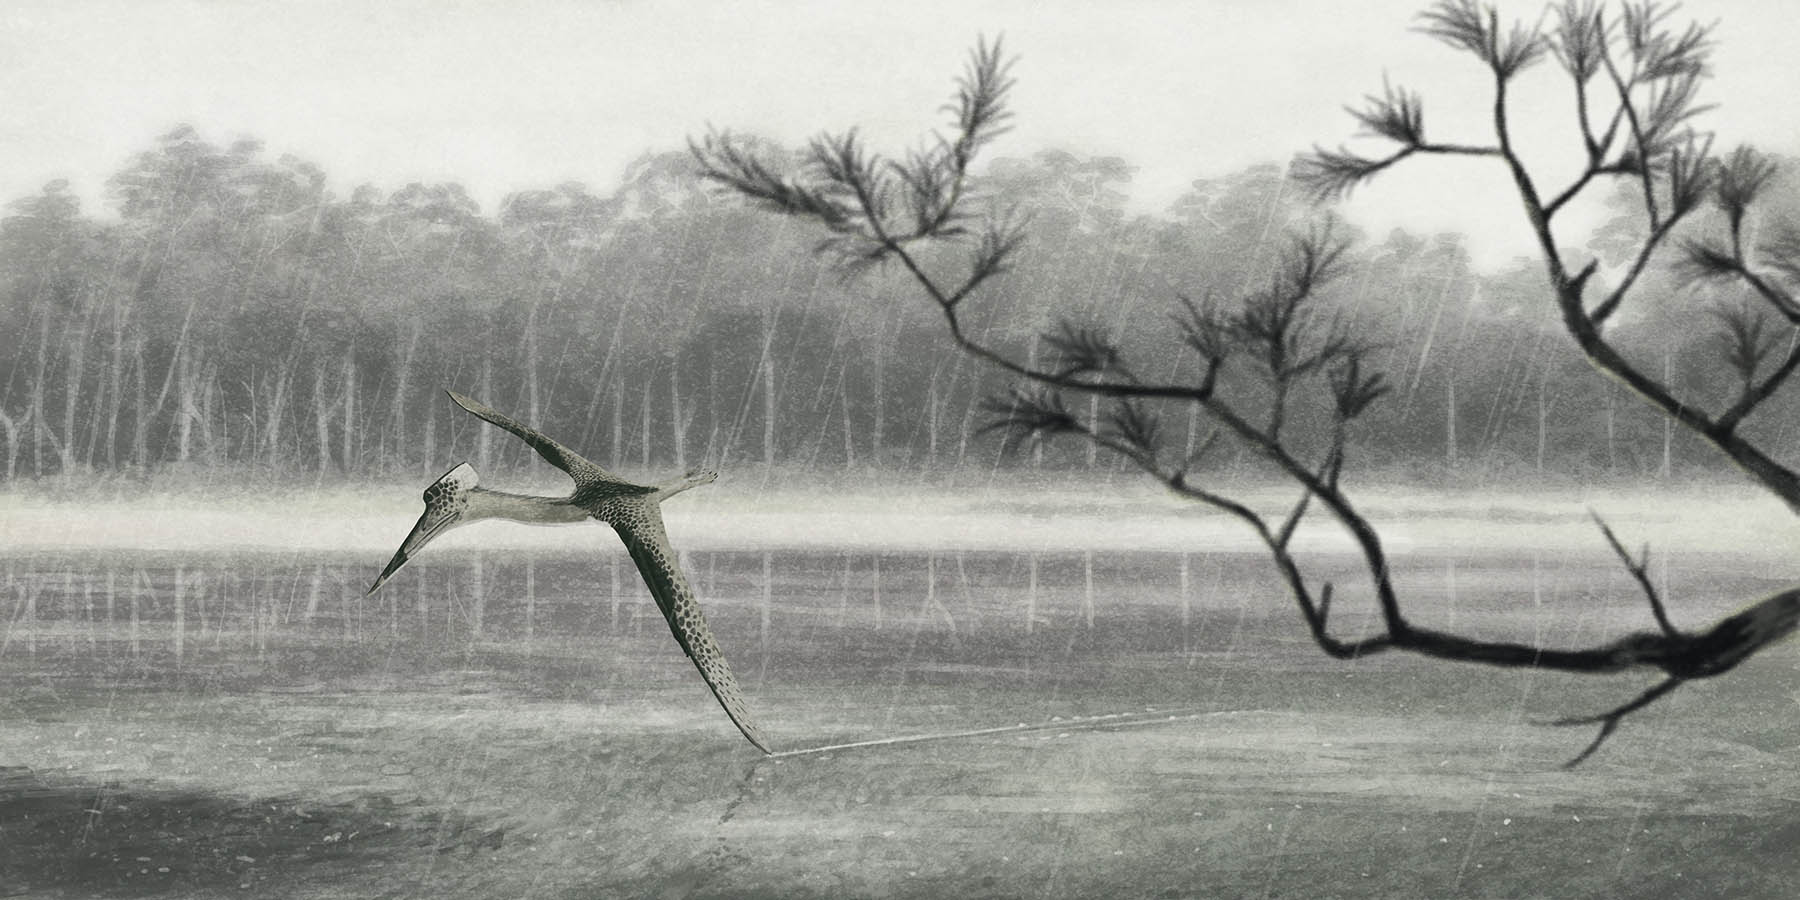 The smaller Quetzalcoatlus lawsoni glides over water, tipping one wing into the river